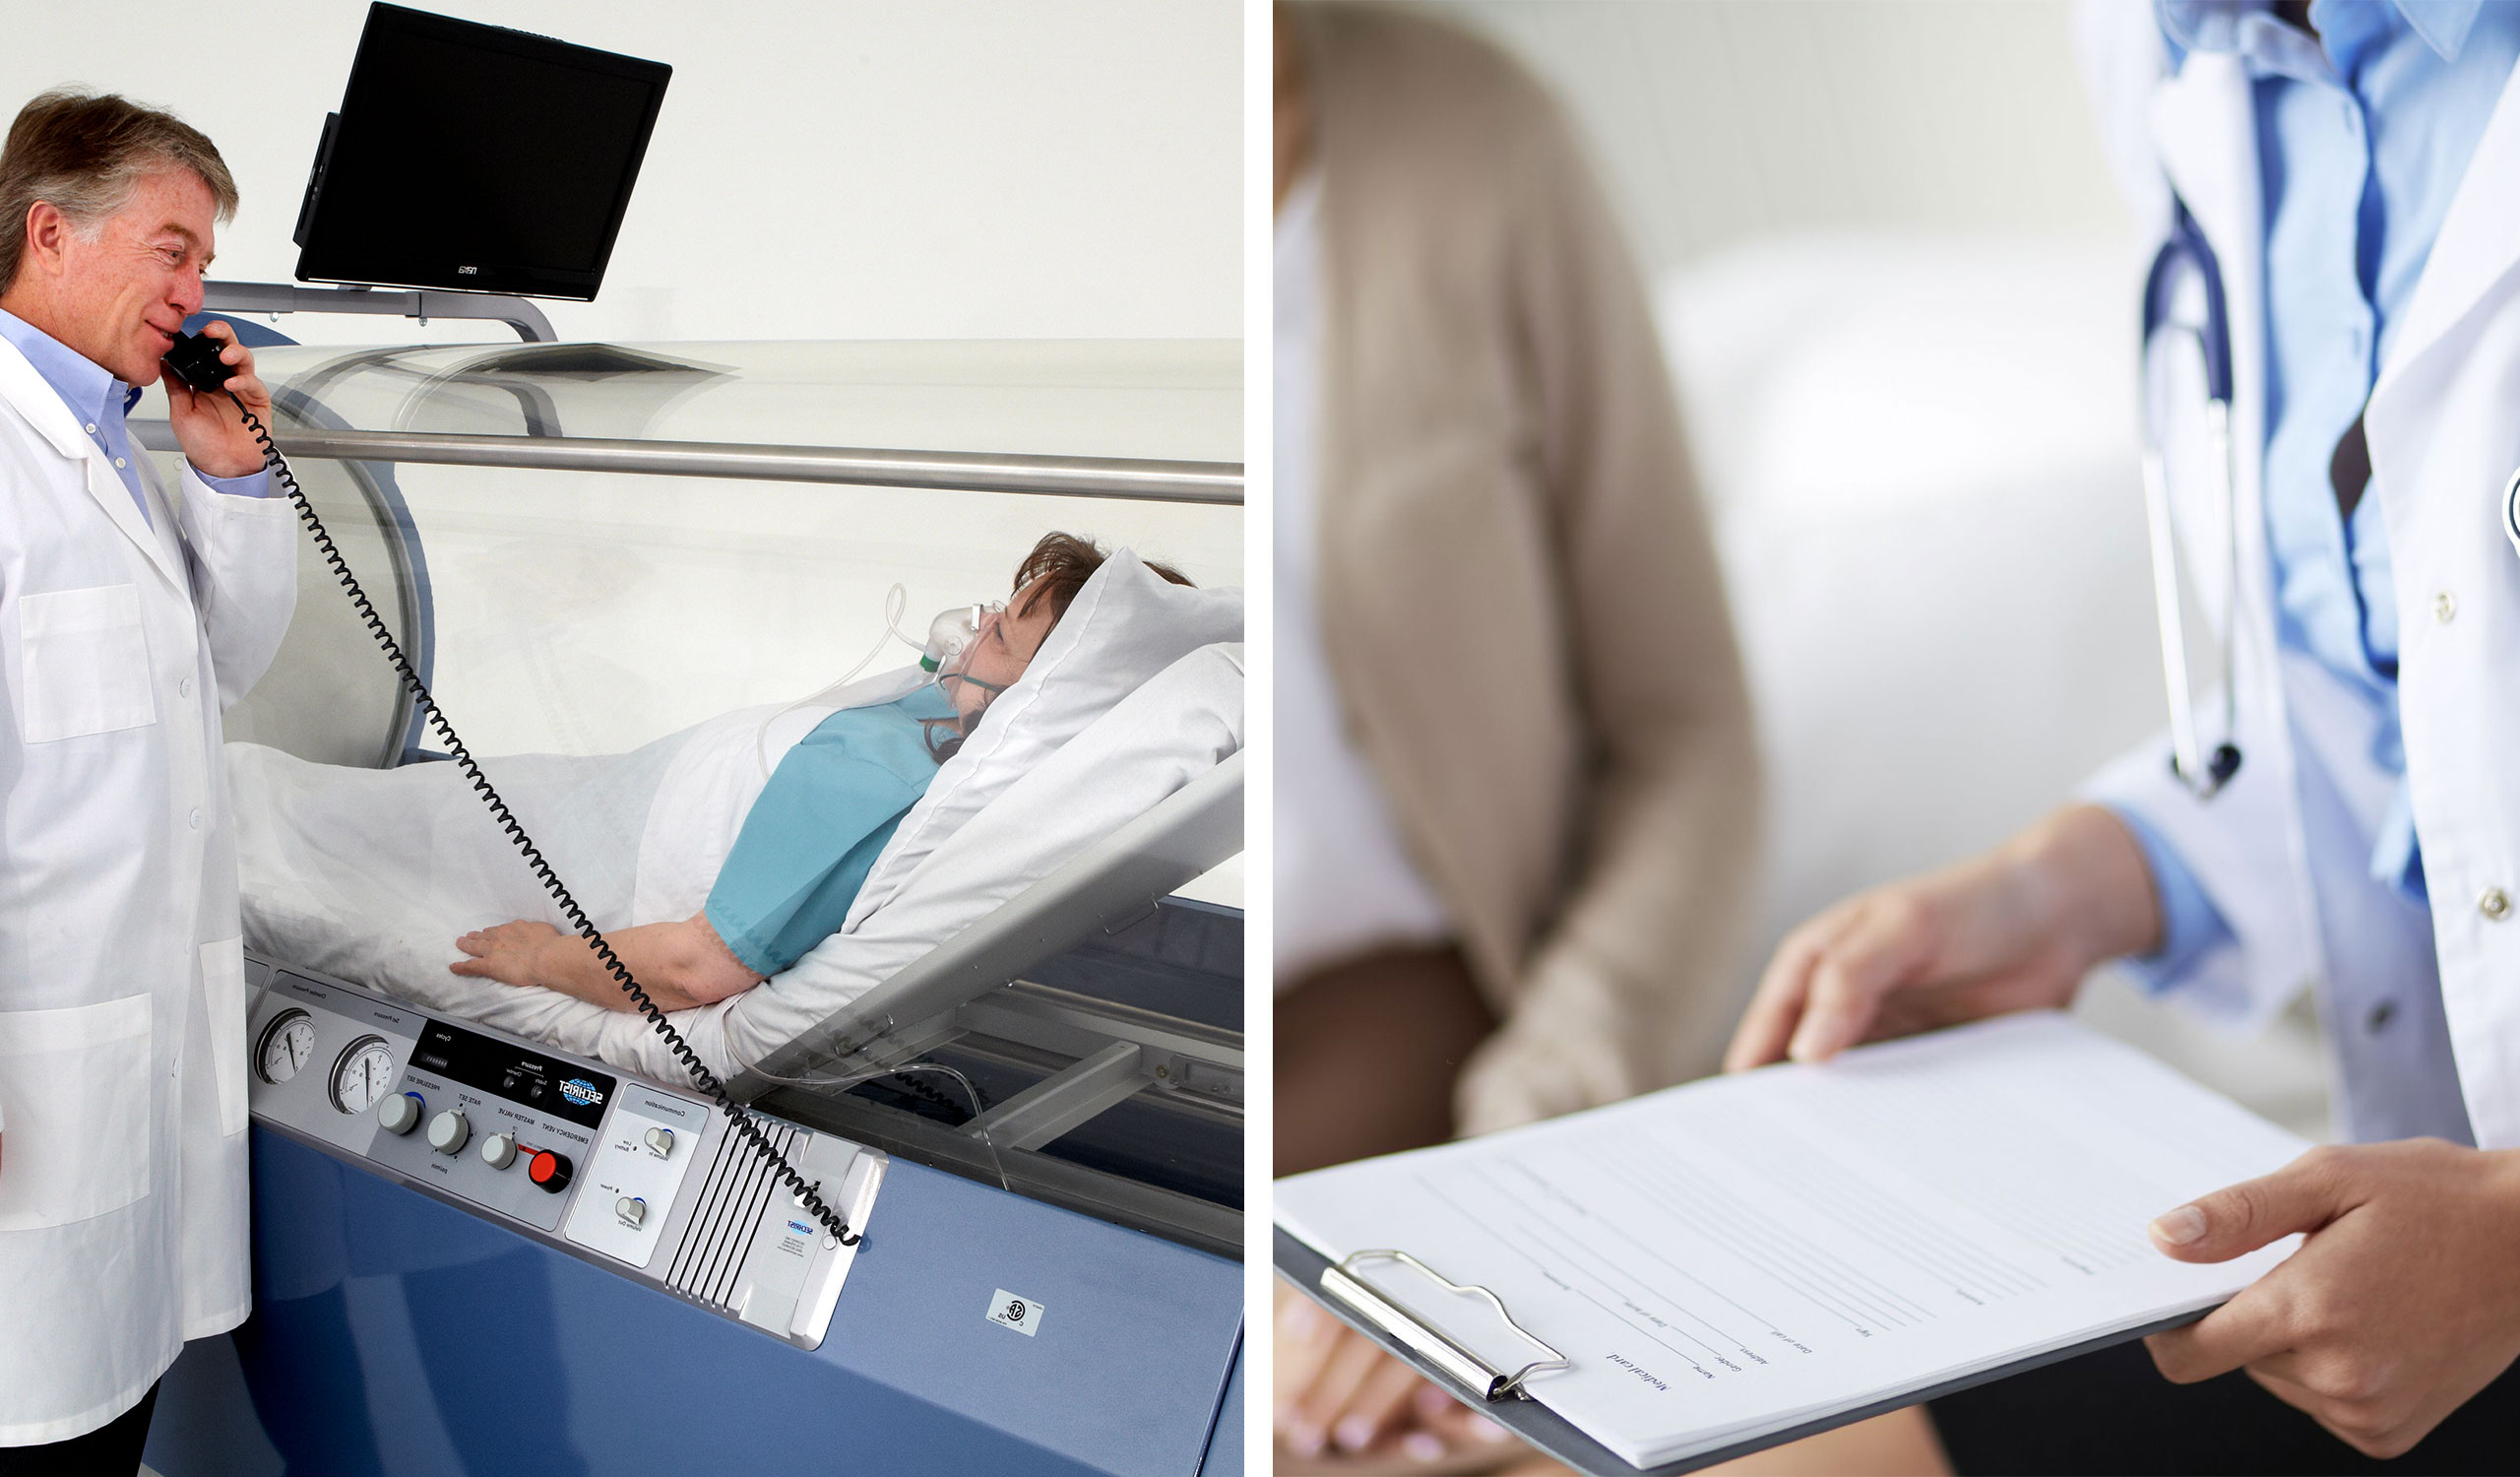 Two images are present. The left shows a doctor speaking to a patient in a hyperbaric oxygen chamber through a black corded phone. The patient wears an oxygen mask inside a clear tube. In the right image, there is a close-up of a patient intake form. 